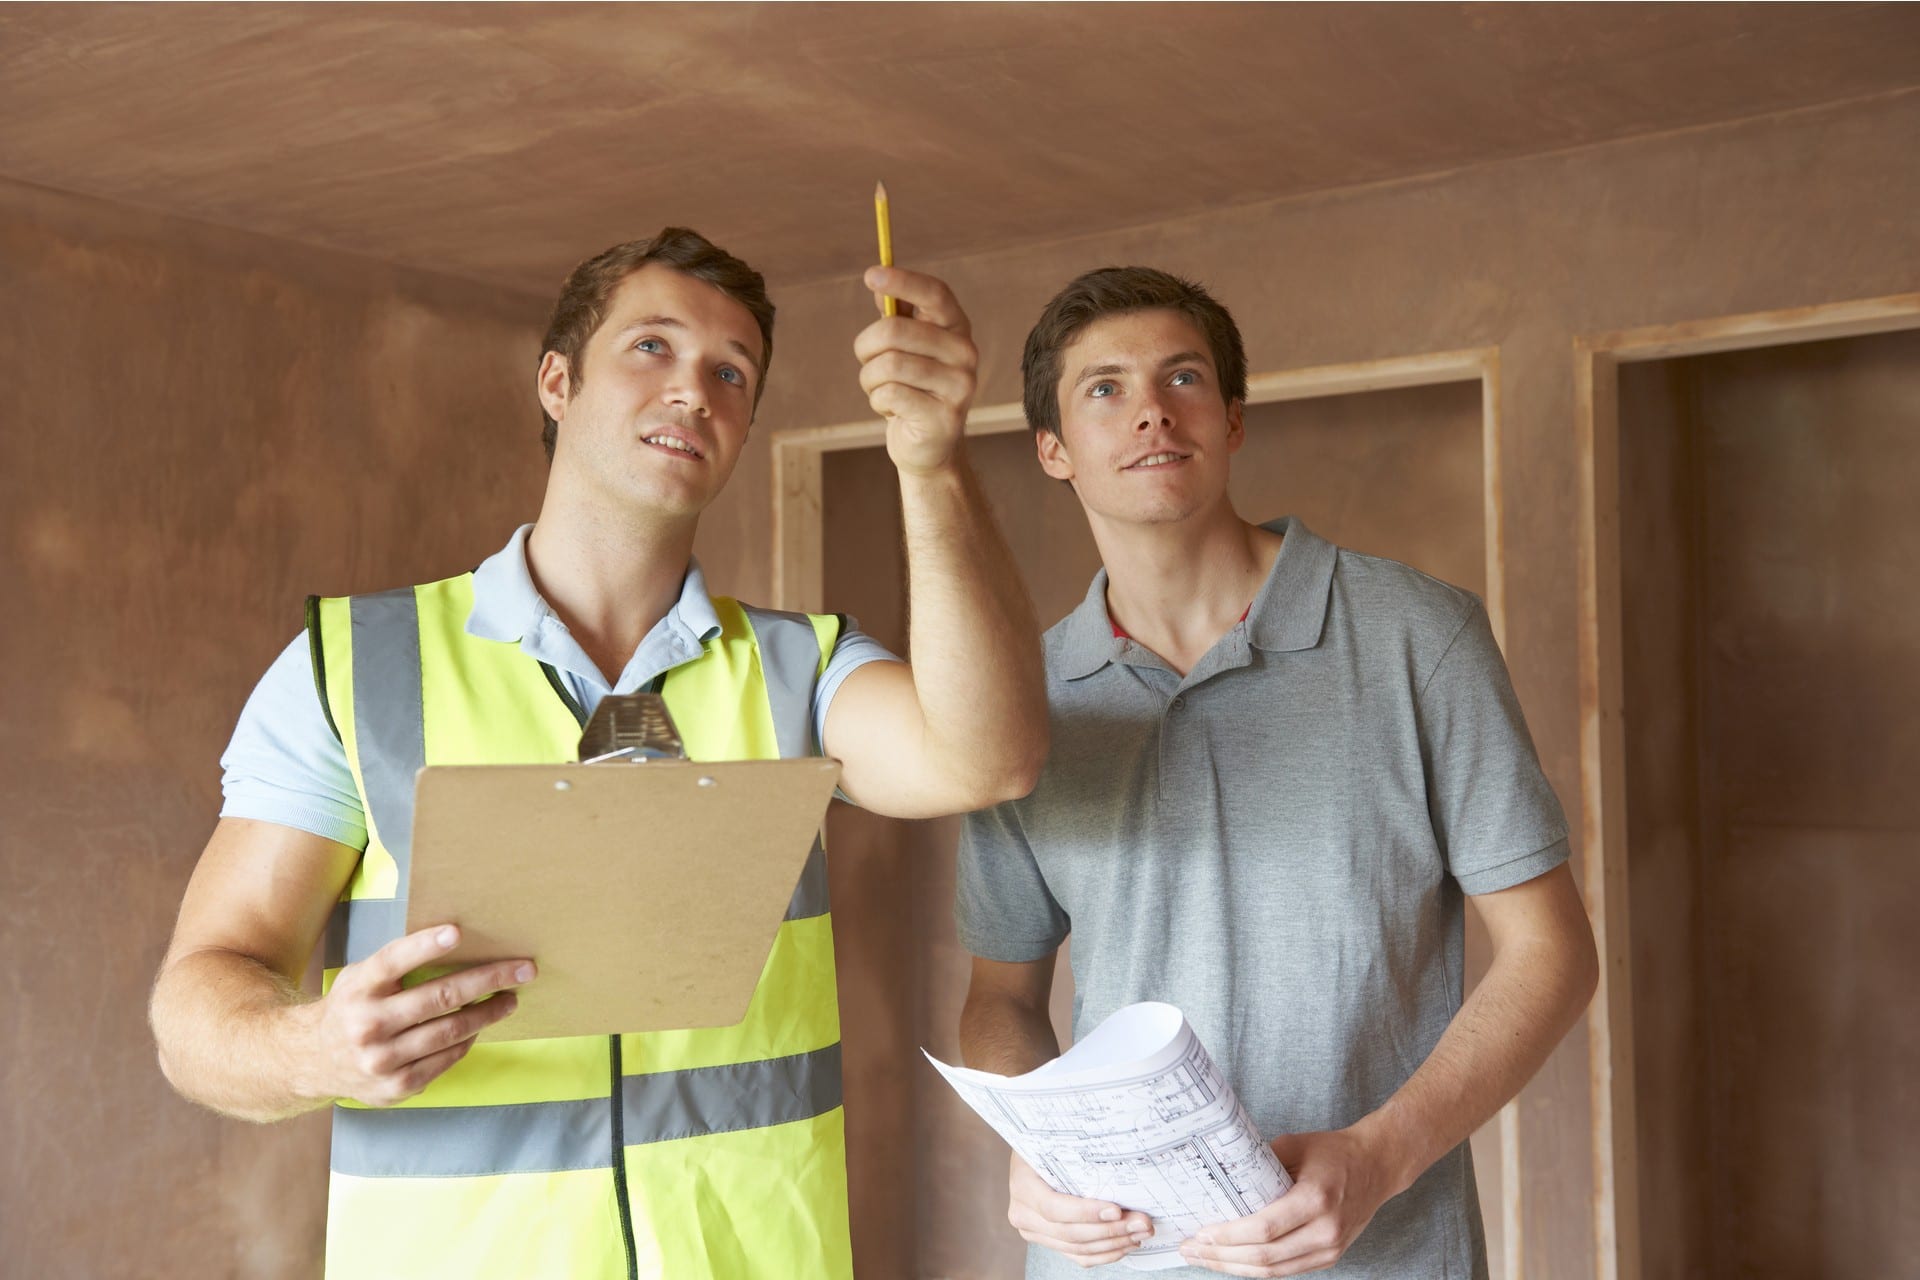 DealHouse's Home Inspection And Repair Process Is Not An Obstacle to A Fast-Moving Cash Offer